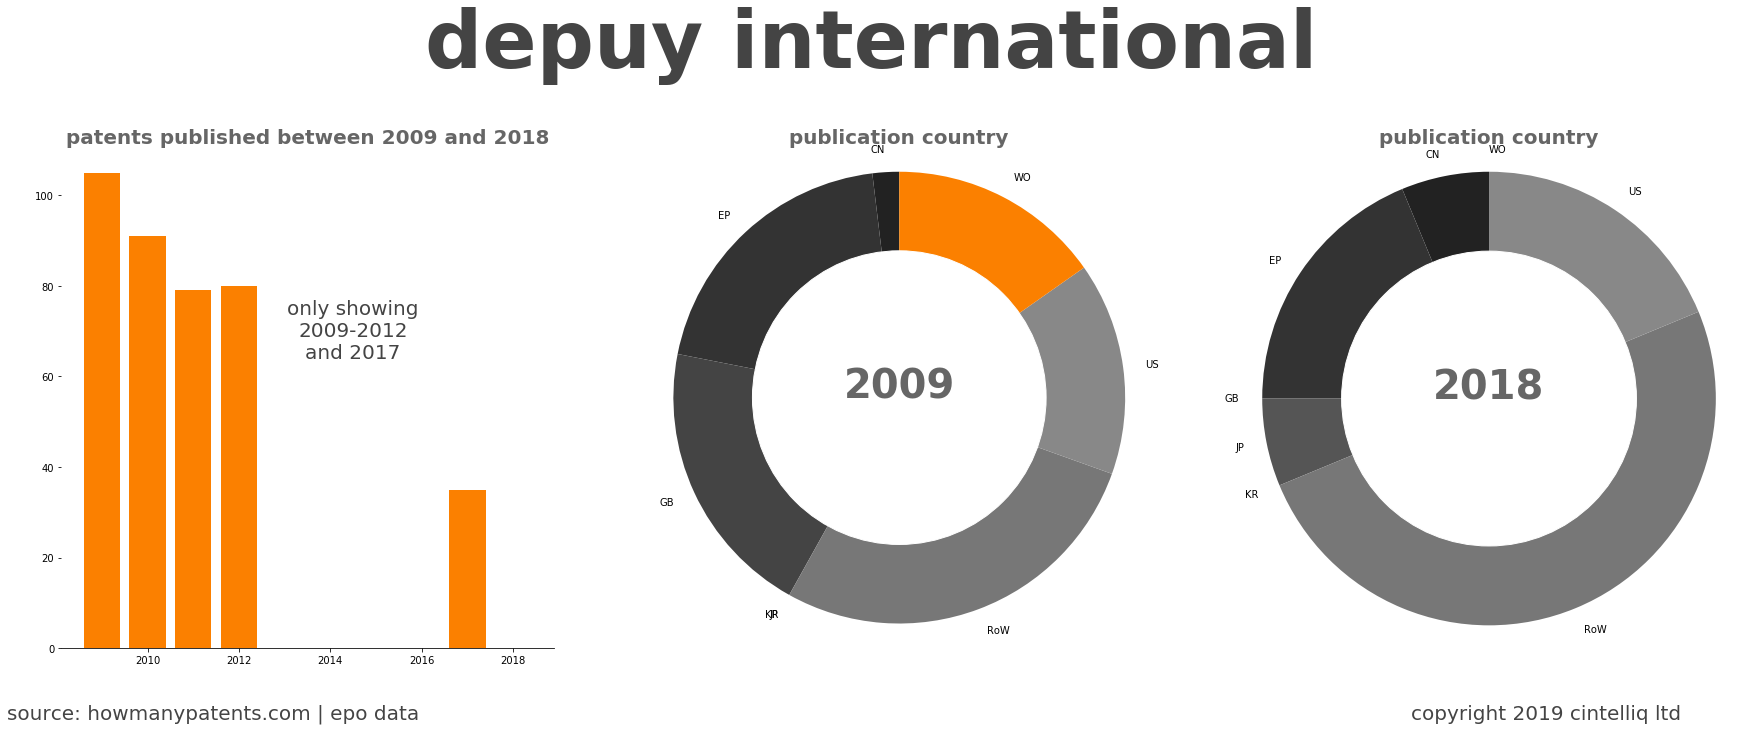 summary of patents for Depuy International